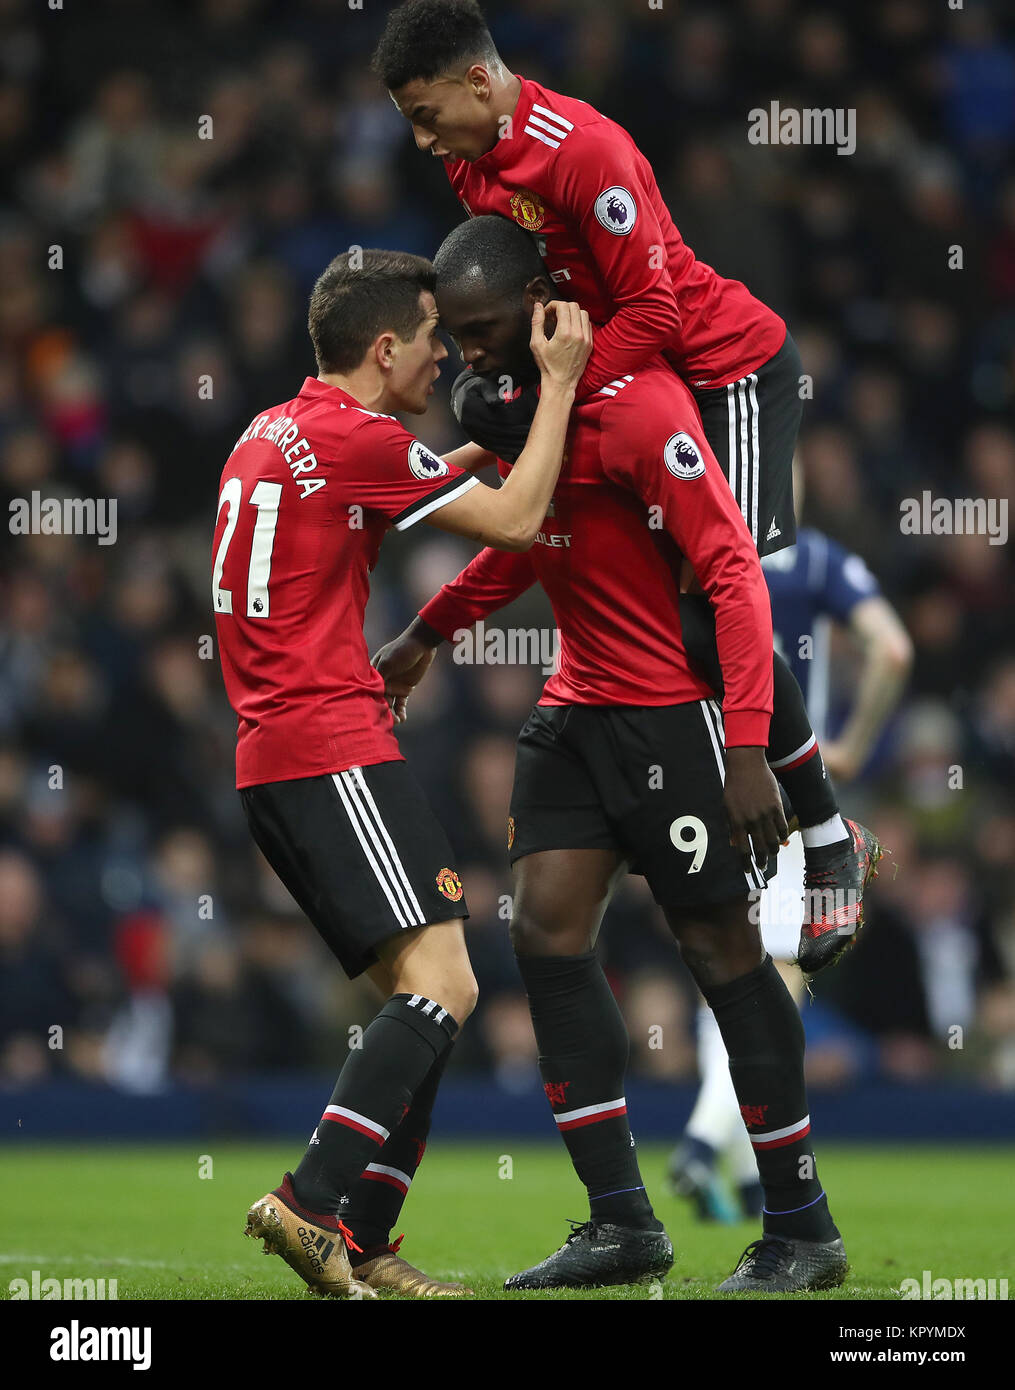 Manchester United's Romelu Lukaku (9) with a muted celebration after scoring his side's first goal of the game during the Premier League match at The Hawthorns, West Bromwich. Stock Photo